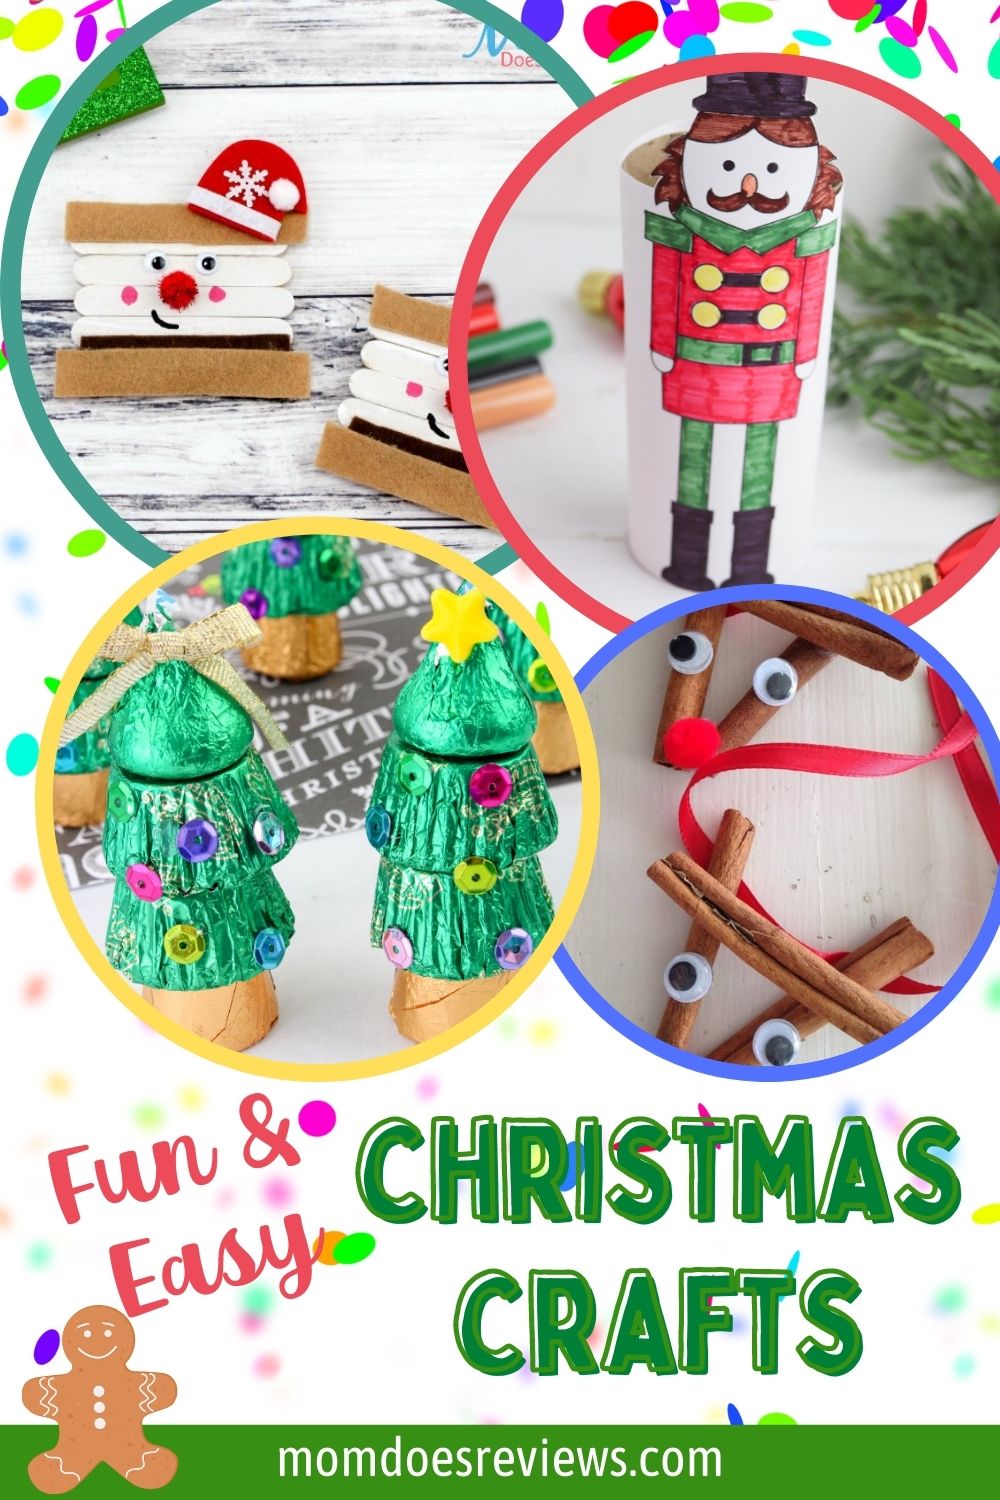 40+ Christmas #Crafts for Kids that are Cute, Fun, & Inexpensive!